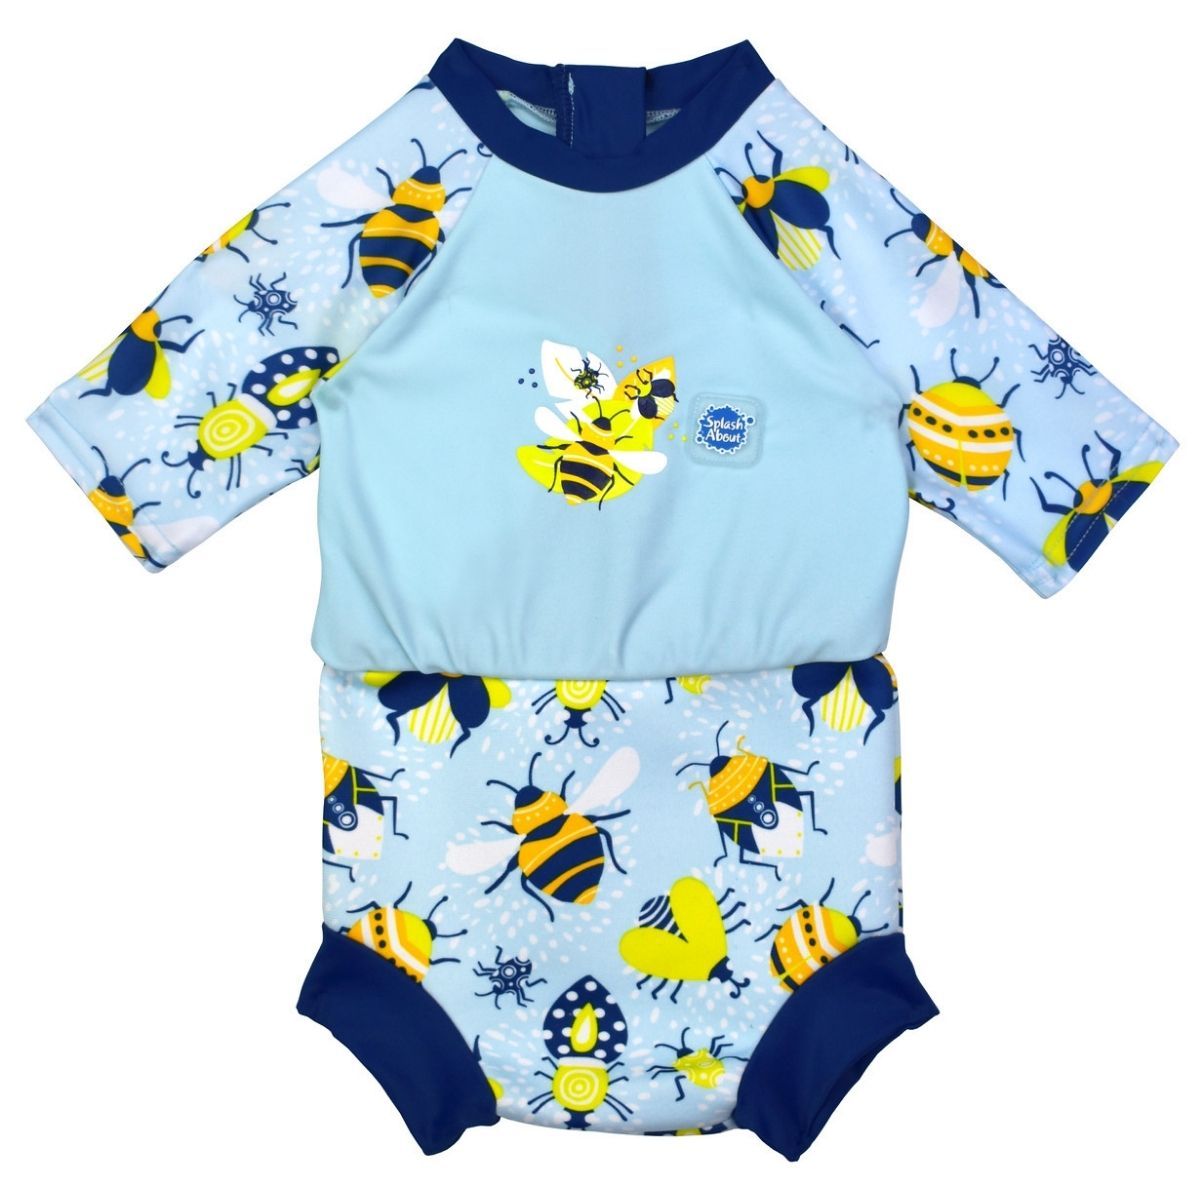 Happy Nappy Sunsuit in baby blue with navy blue trims and insects themed print. Front.